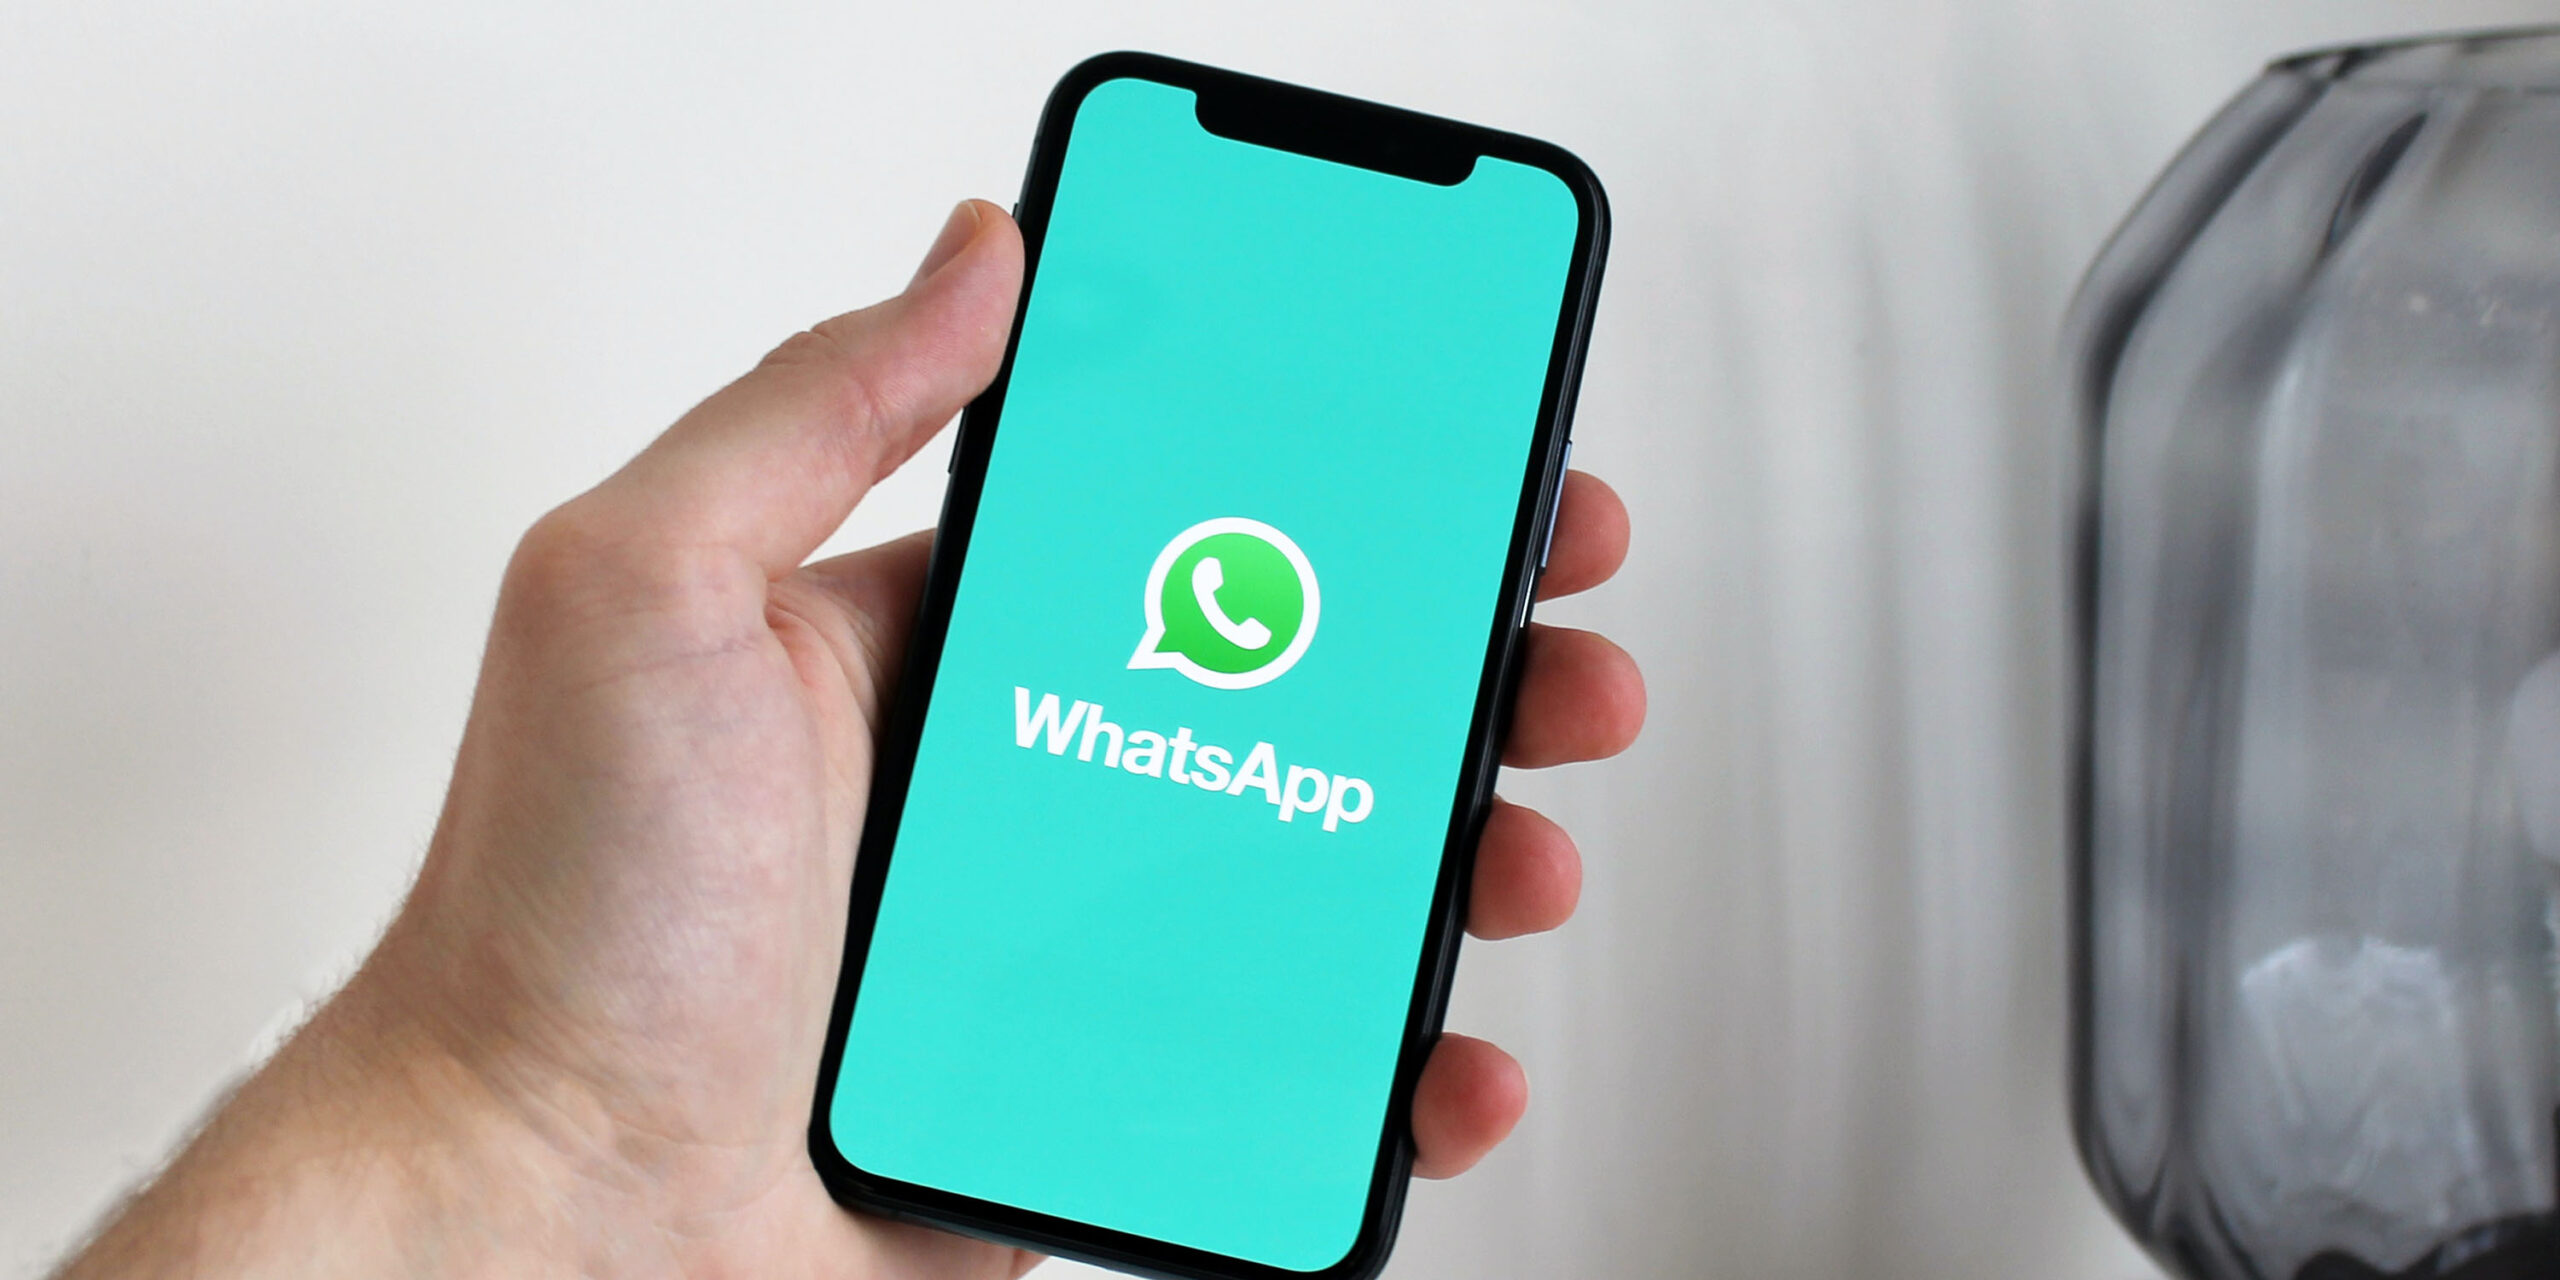 WhatsApp is almost prepared to move Android chats to iPhone